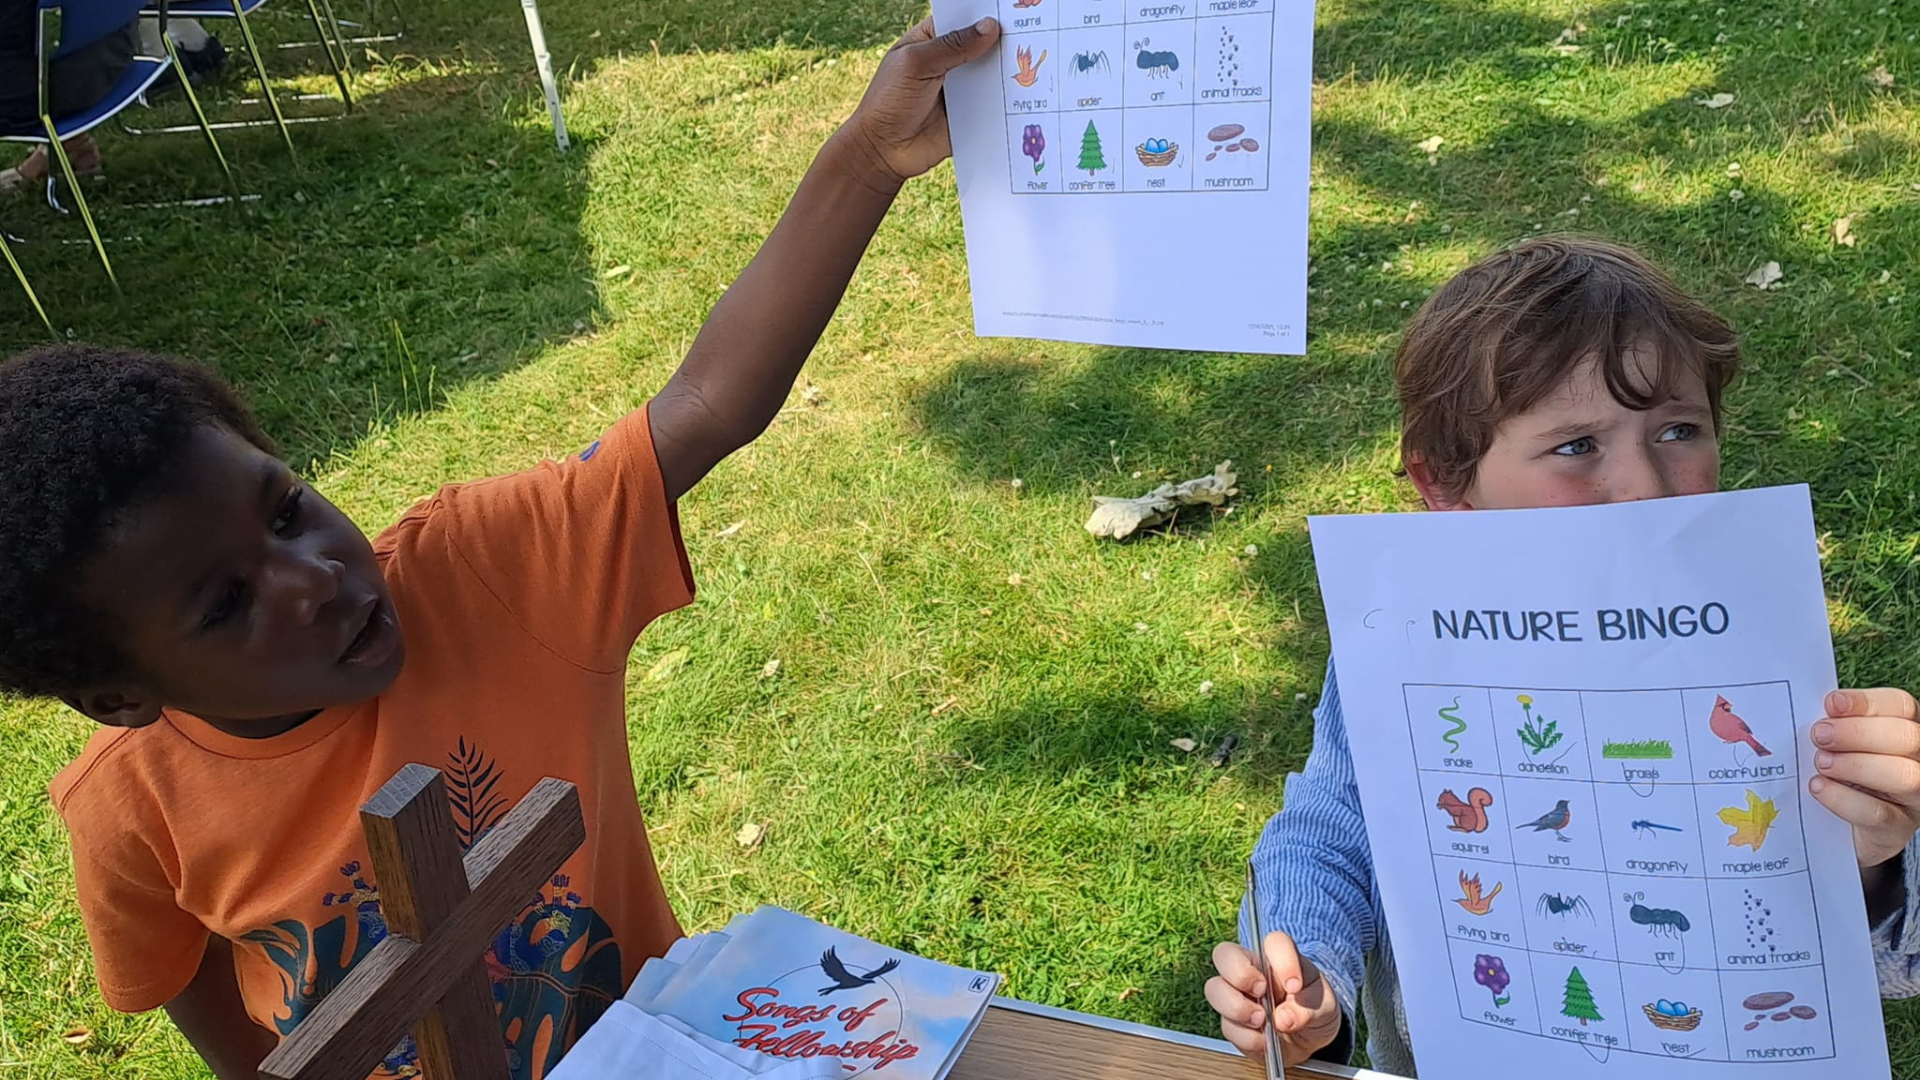 Two young boys hold up nature bingo cards